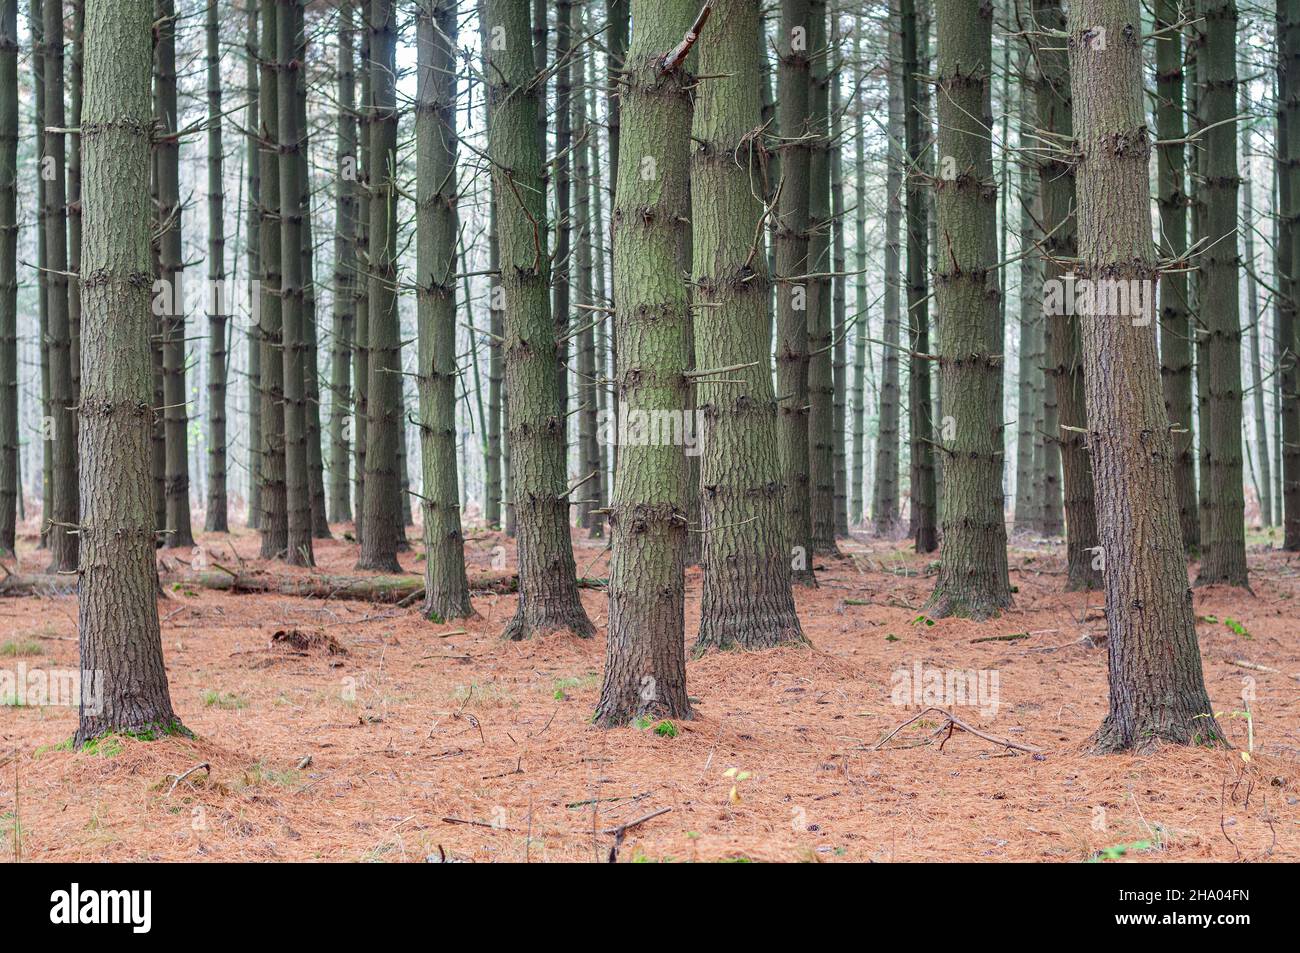 Pine trees growing in pine tree forest Stock Photo